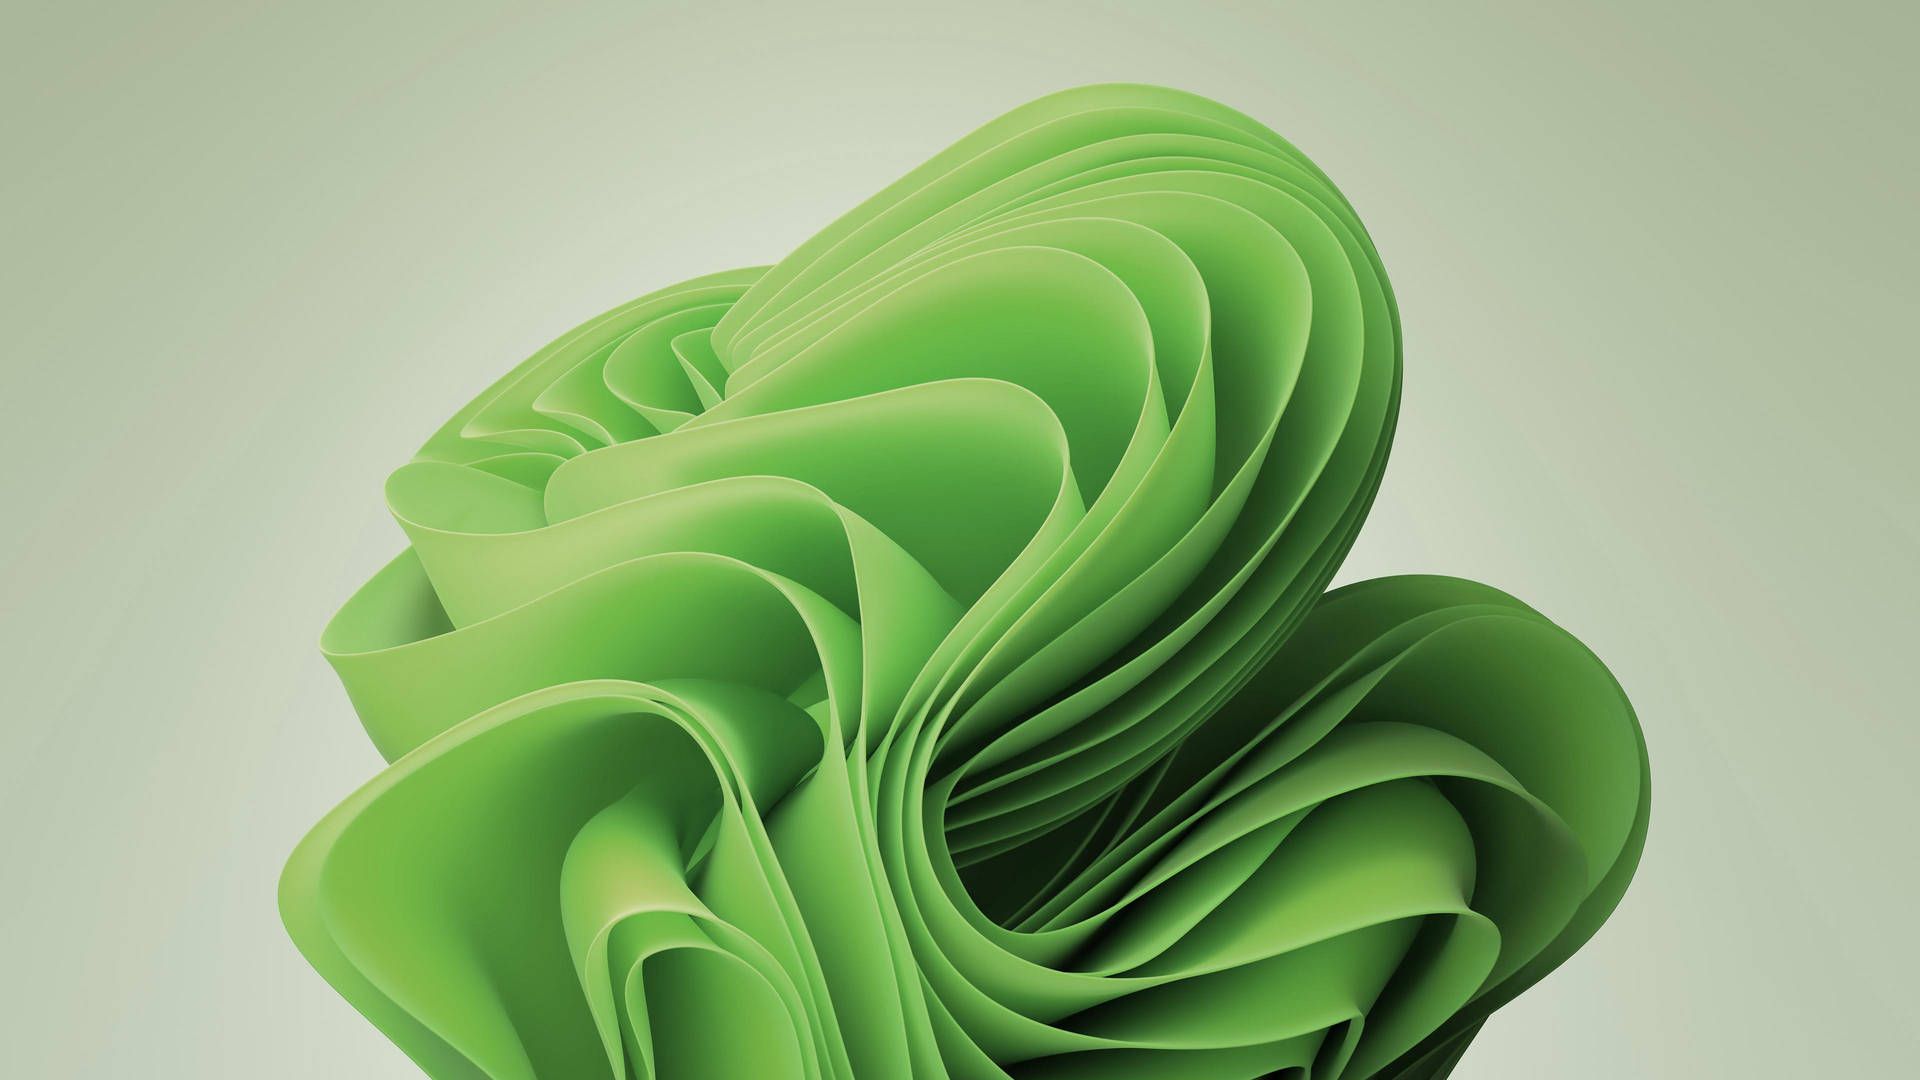 A green abstract wallpaper made of paper - Windows 11